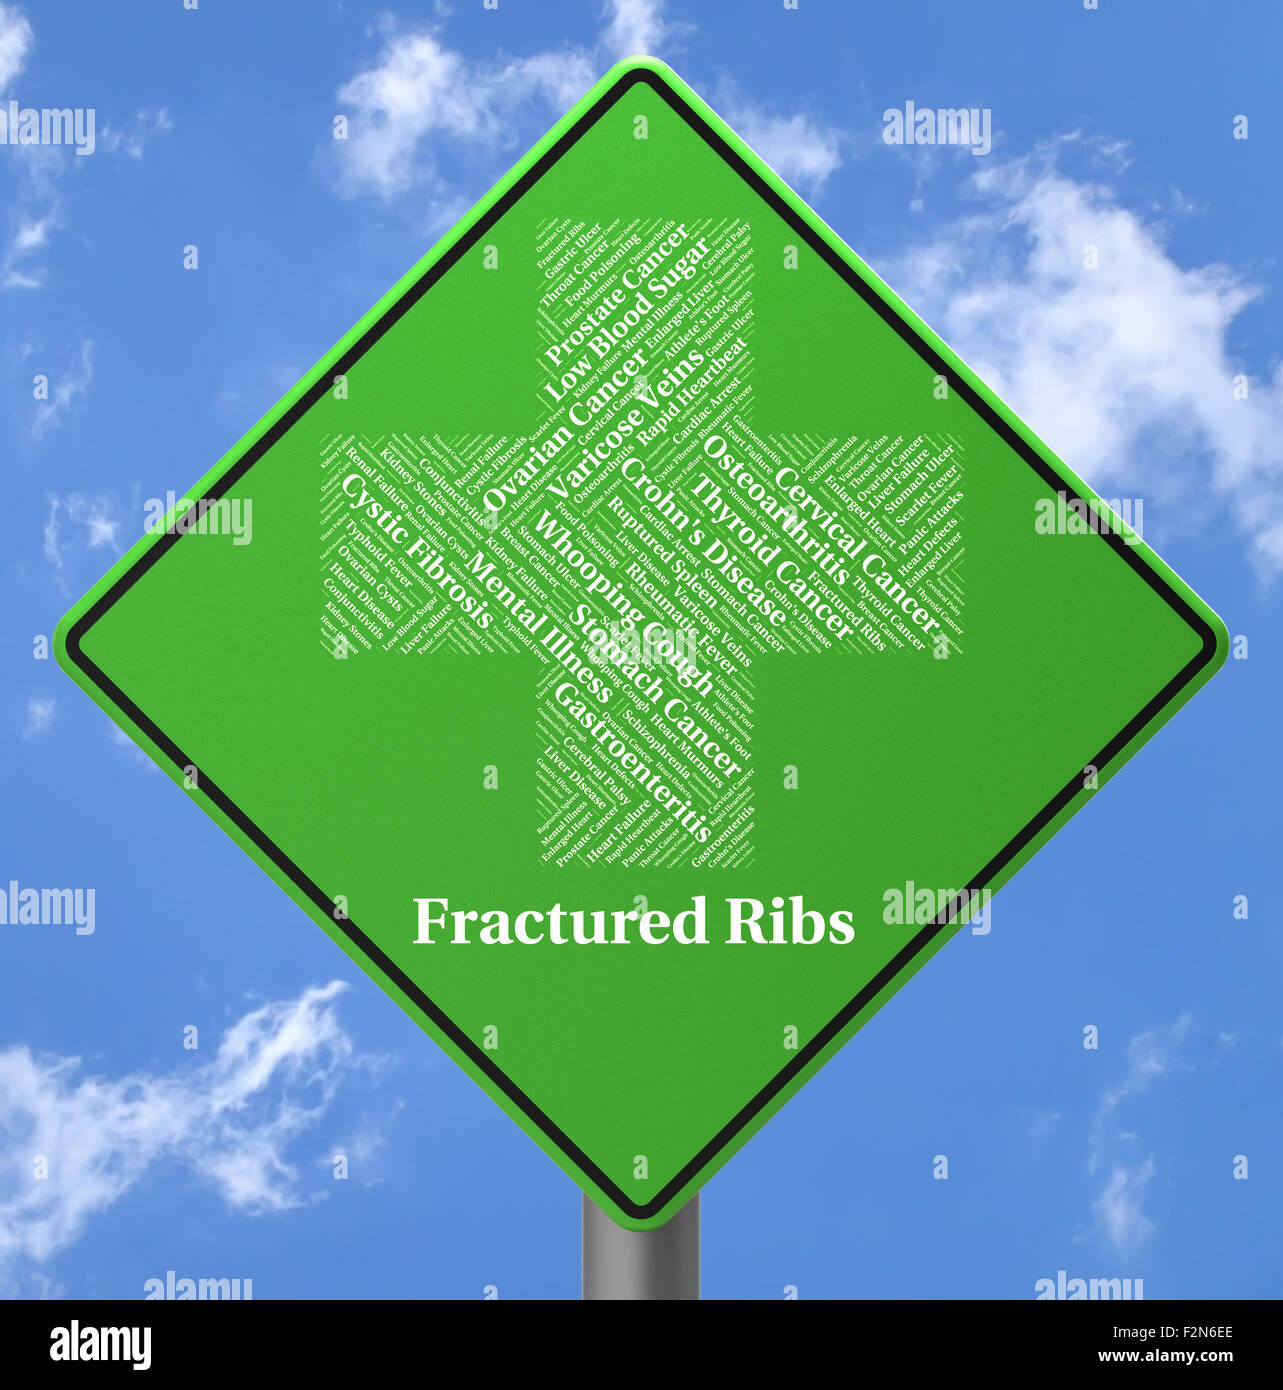 Fractured Ribs Meaning Ill Health And Ailment Stock Photo